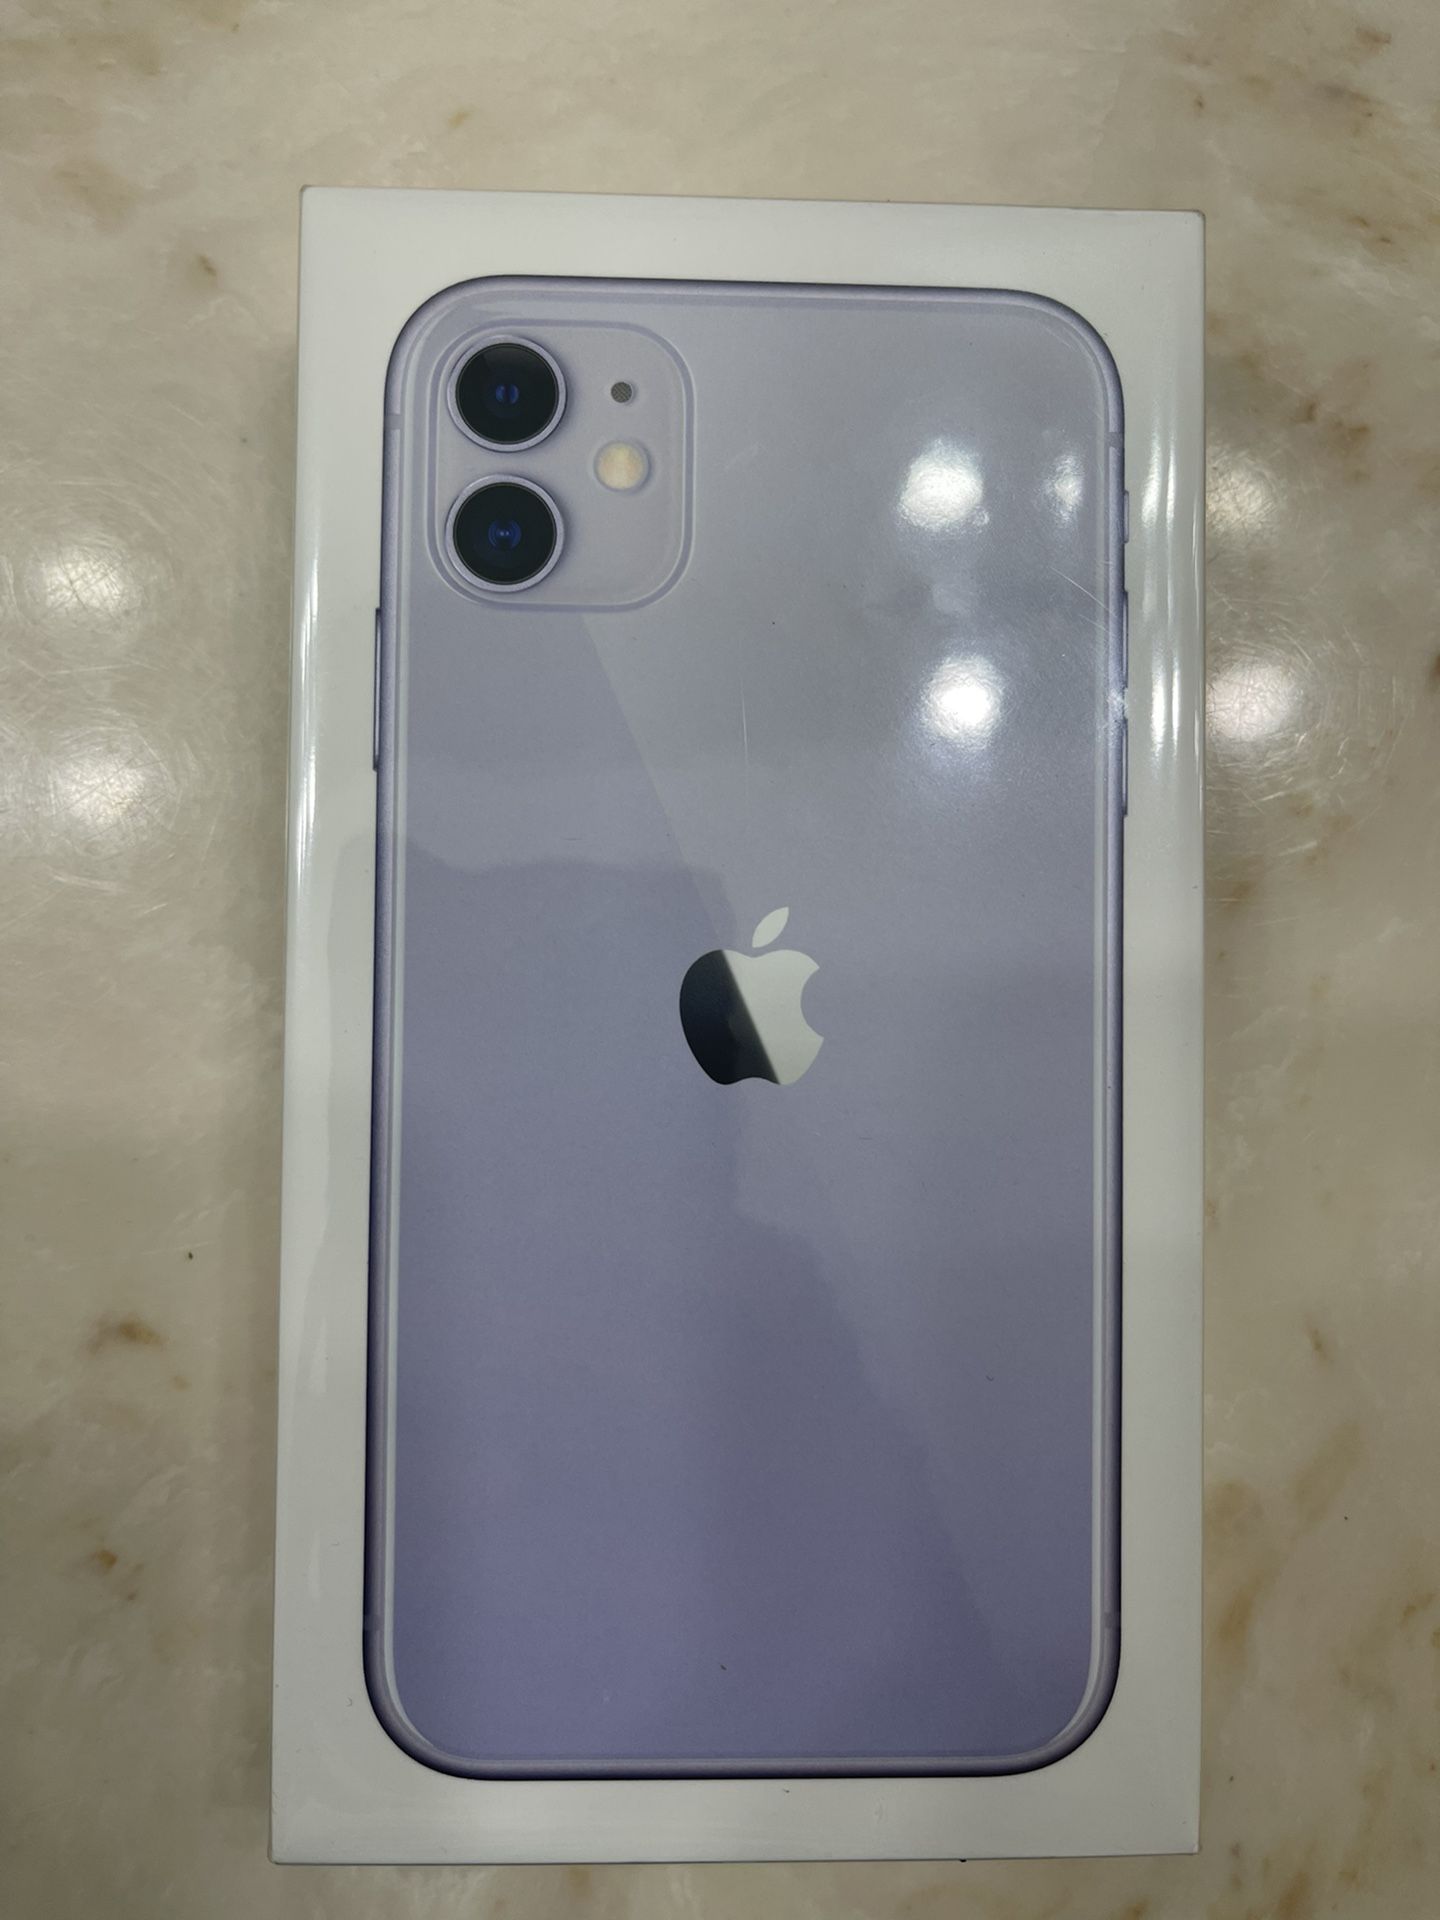 Iphone 11 Brand New Sealed In Box $300